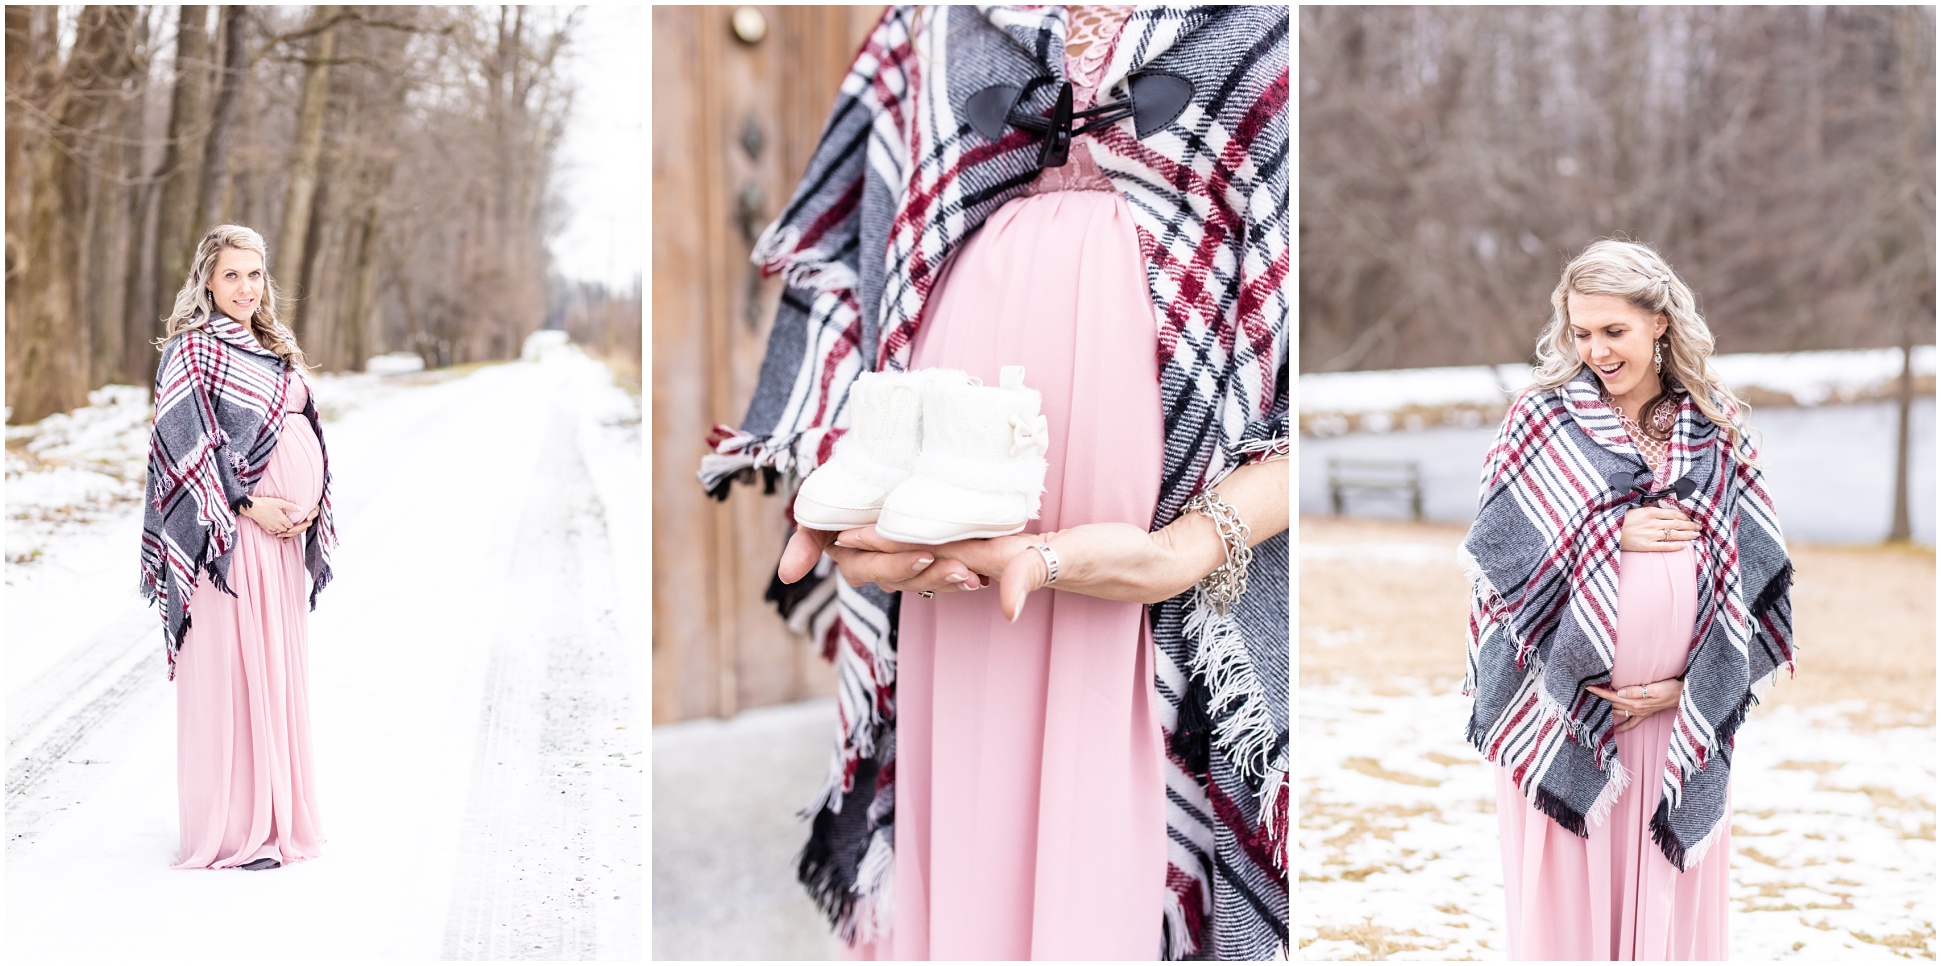 Three Images of a Mom-to-be during her snowy maternity session, wearing a flowing pink dress and a winter shaw